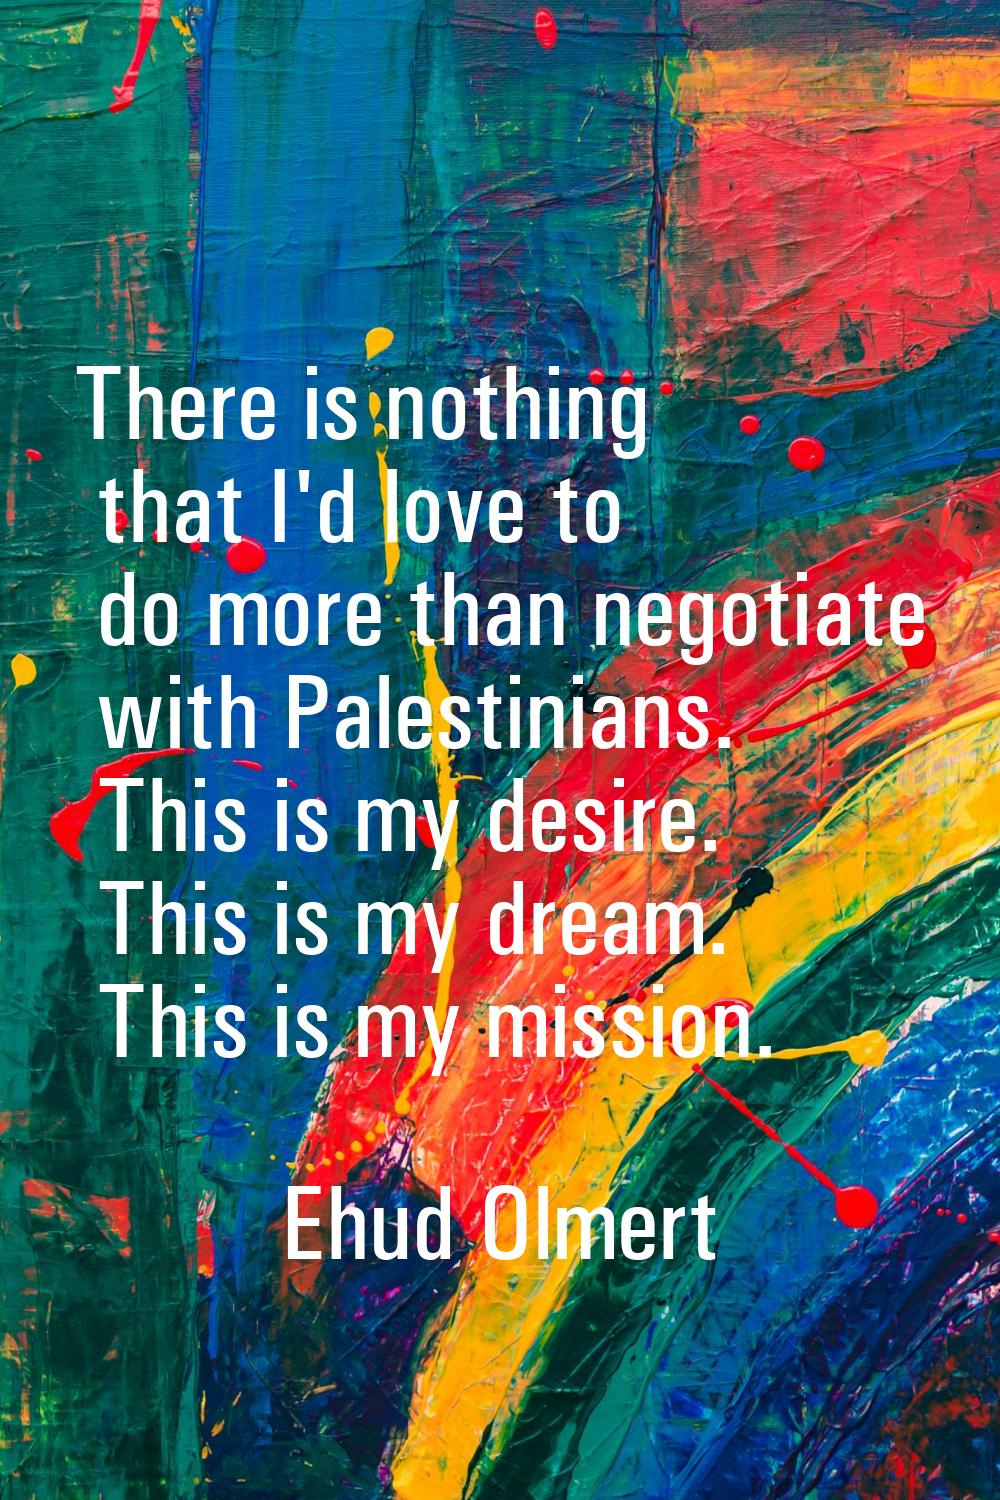 There is nothing that I'd love to do more than negotiate with Palestinians. This is my desire. This